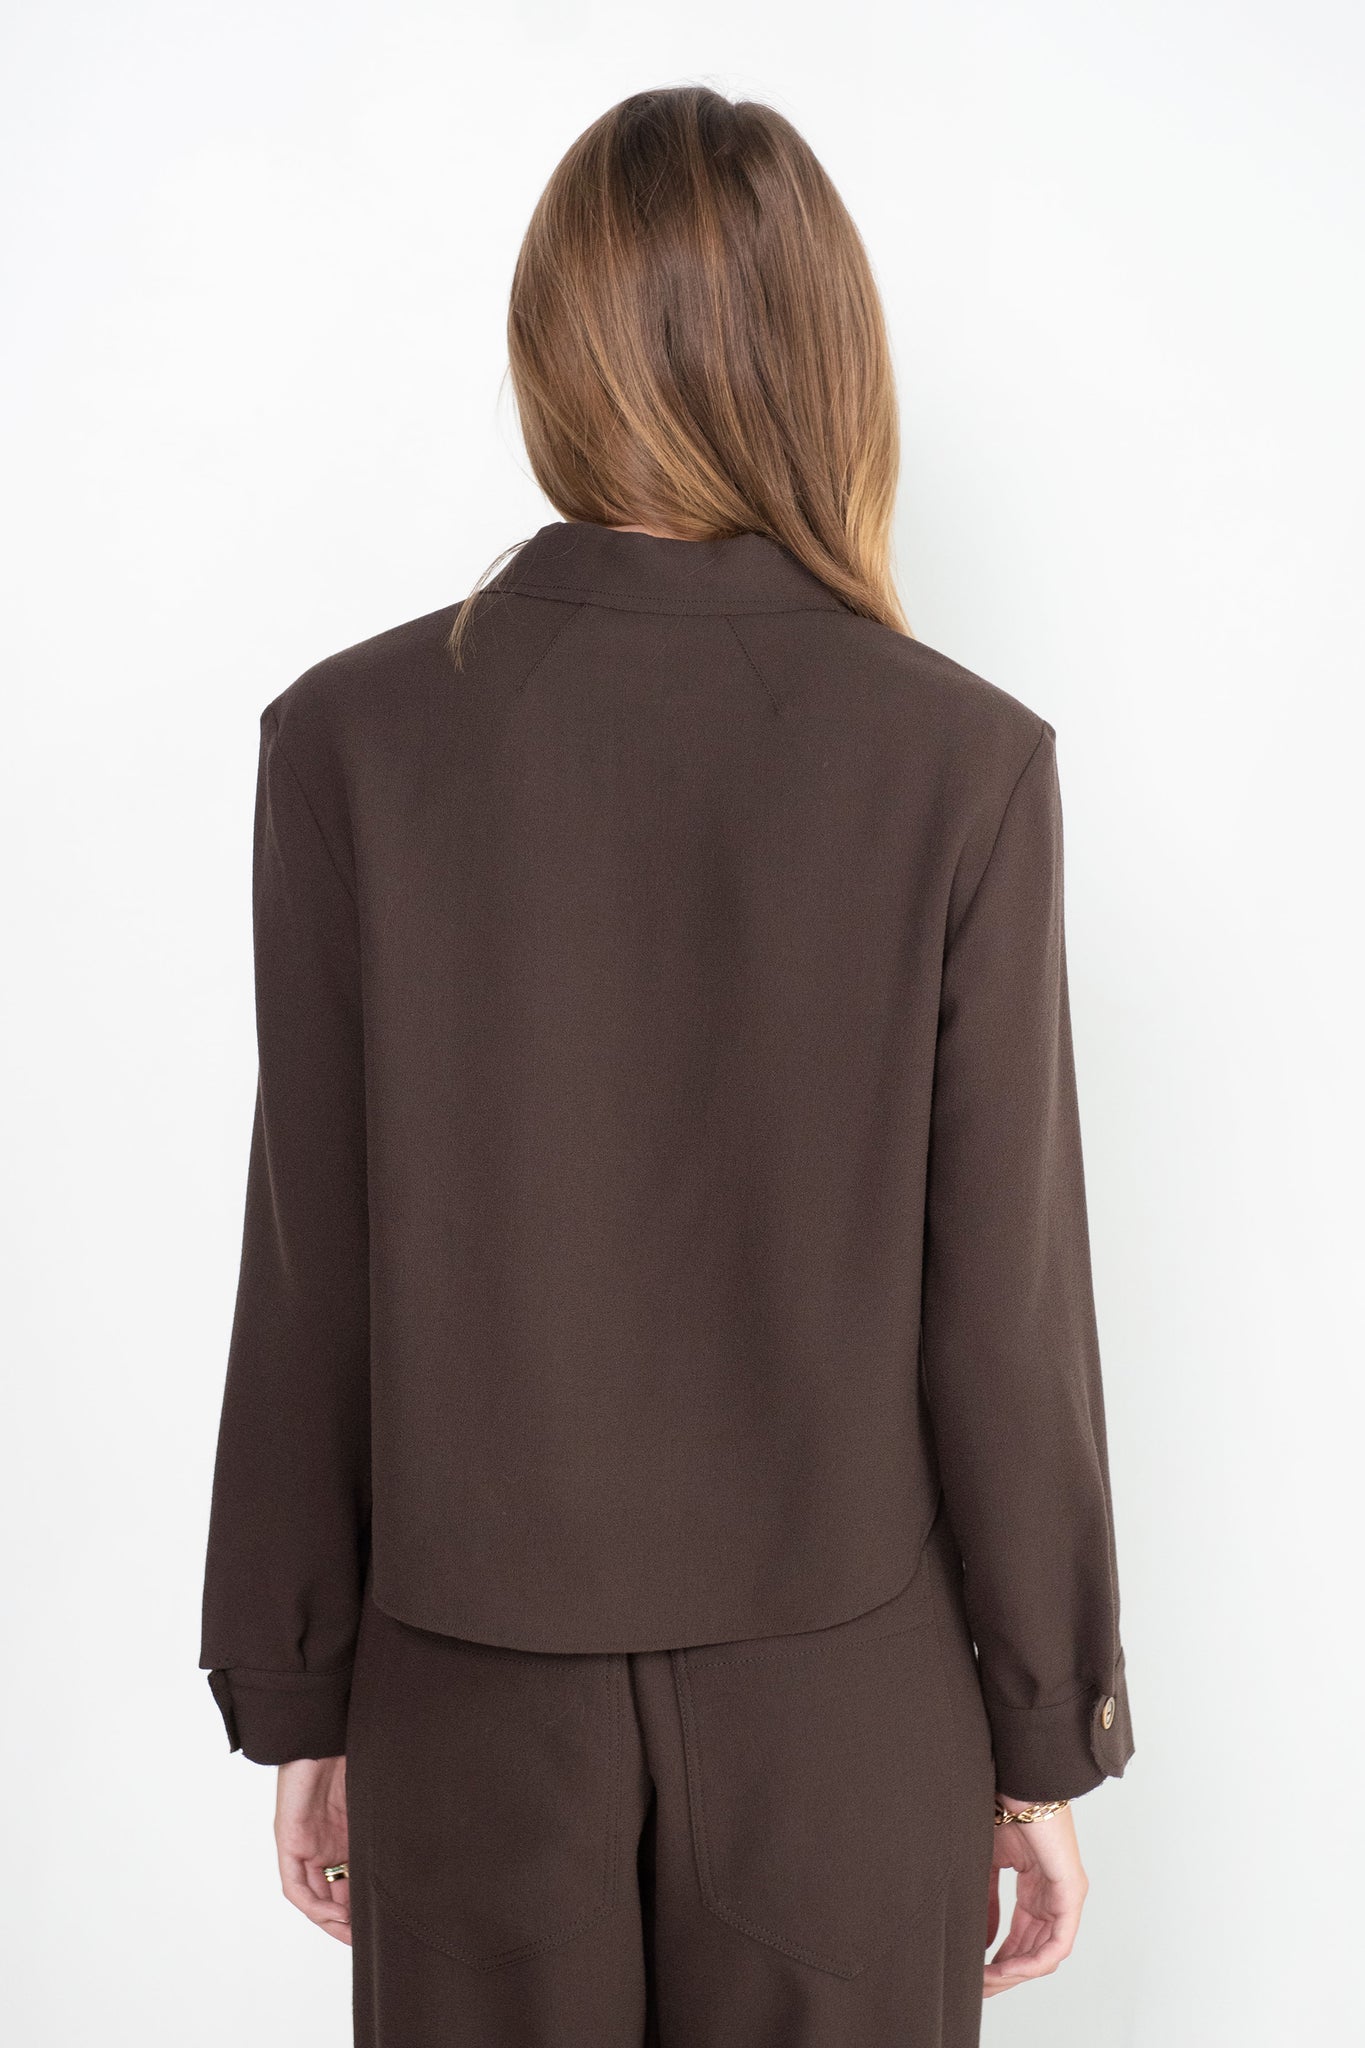 Veronique Leroy - Rounded Collar Shirt, Chocolate